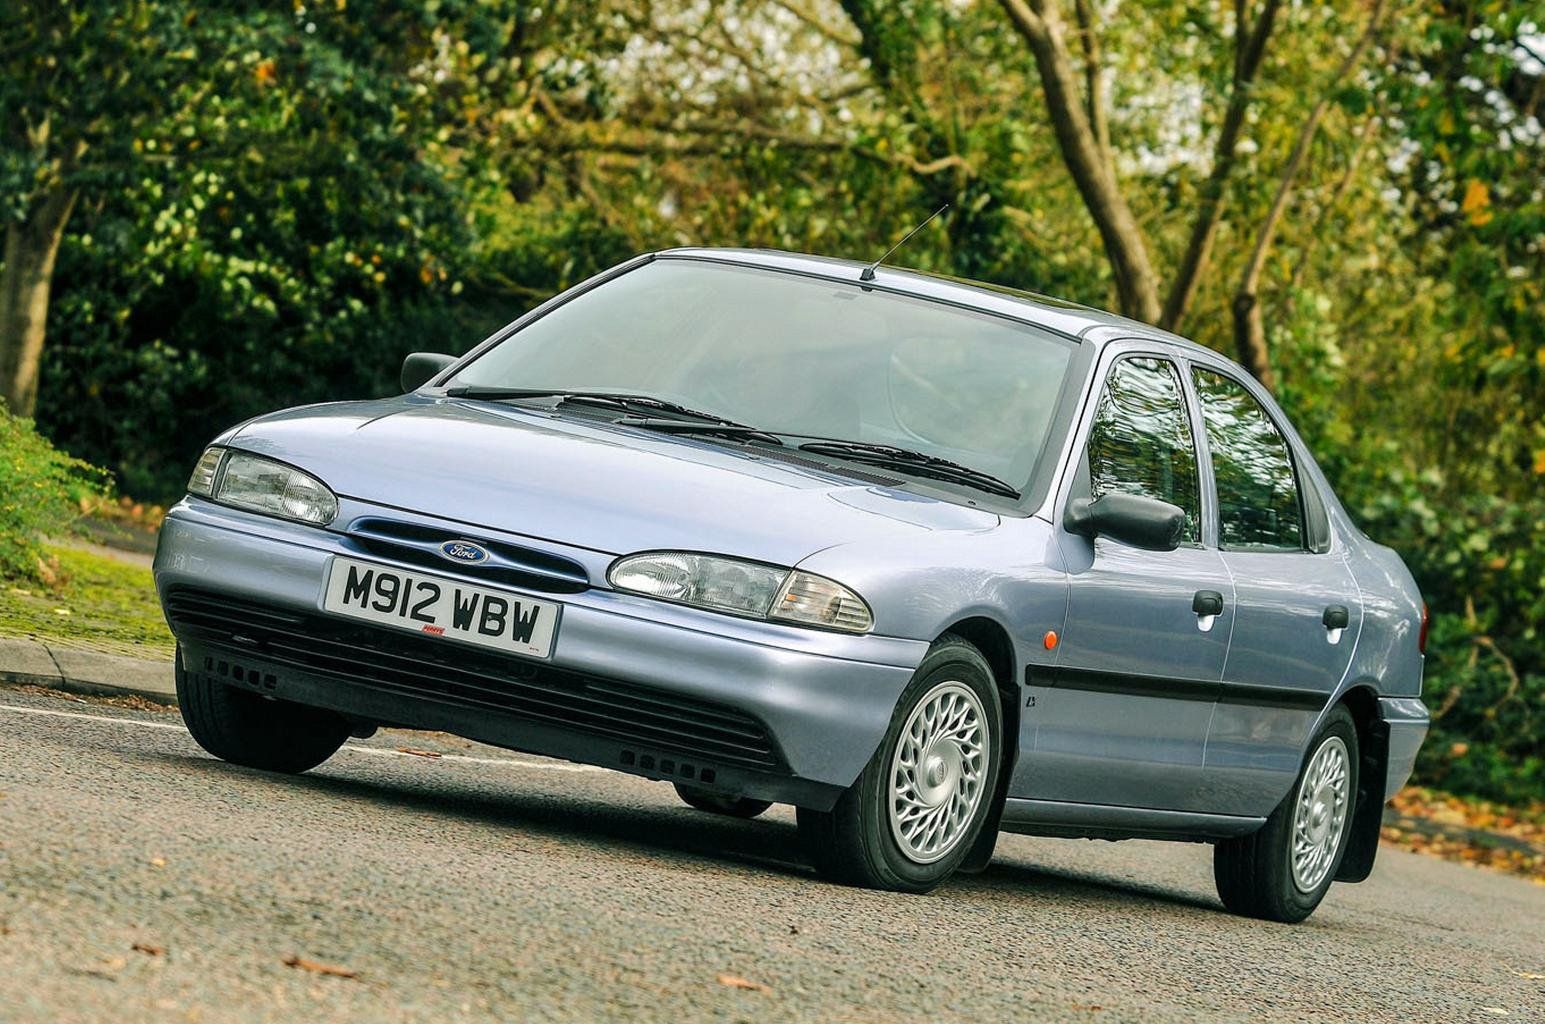 The End Of An Era: Here's Why Ford Is Discontinuing The Mondeo